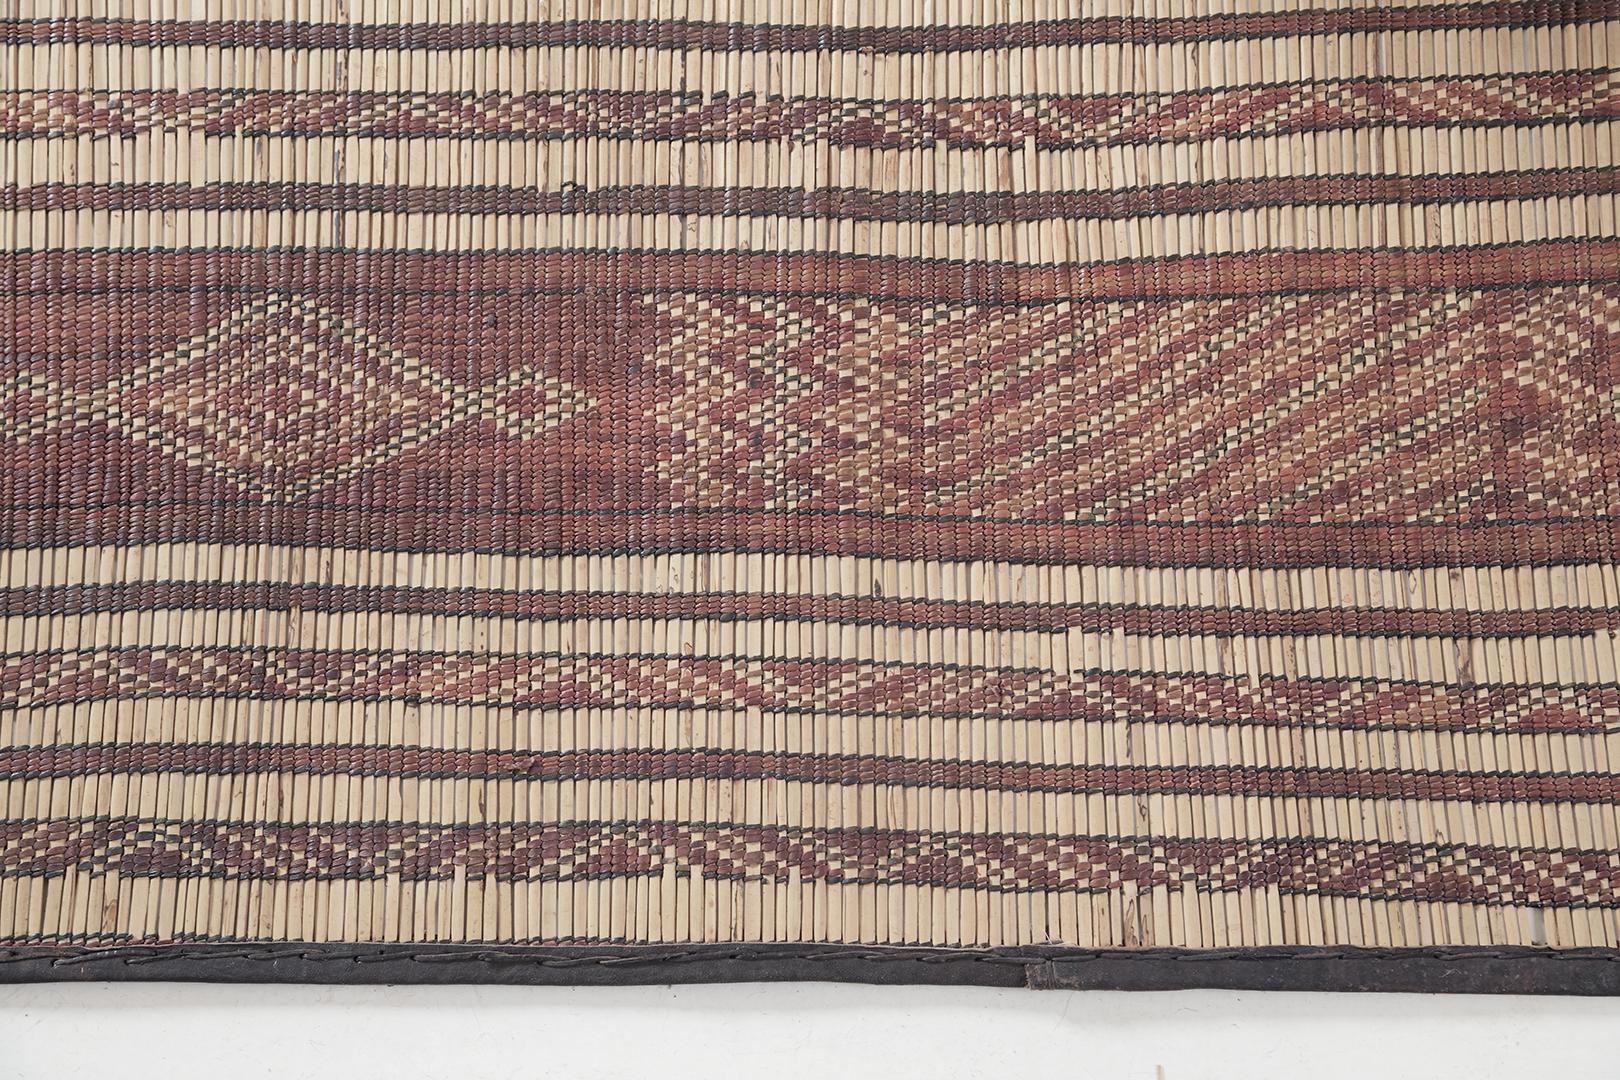 One of the finest mats in our collection has come to enhance your designed spaces. Elegant diamonds and Berber symbols are featured and highlighted on this gorgeous mat. With its strong details that are handwoven in reed and leather, it will be